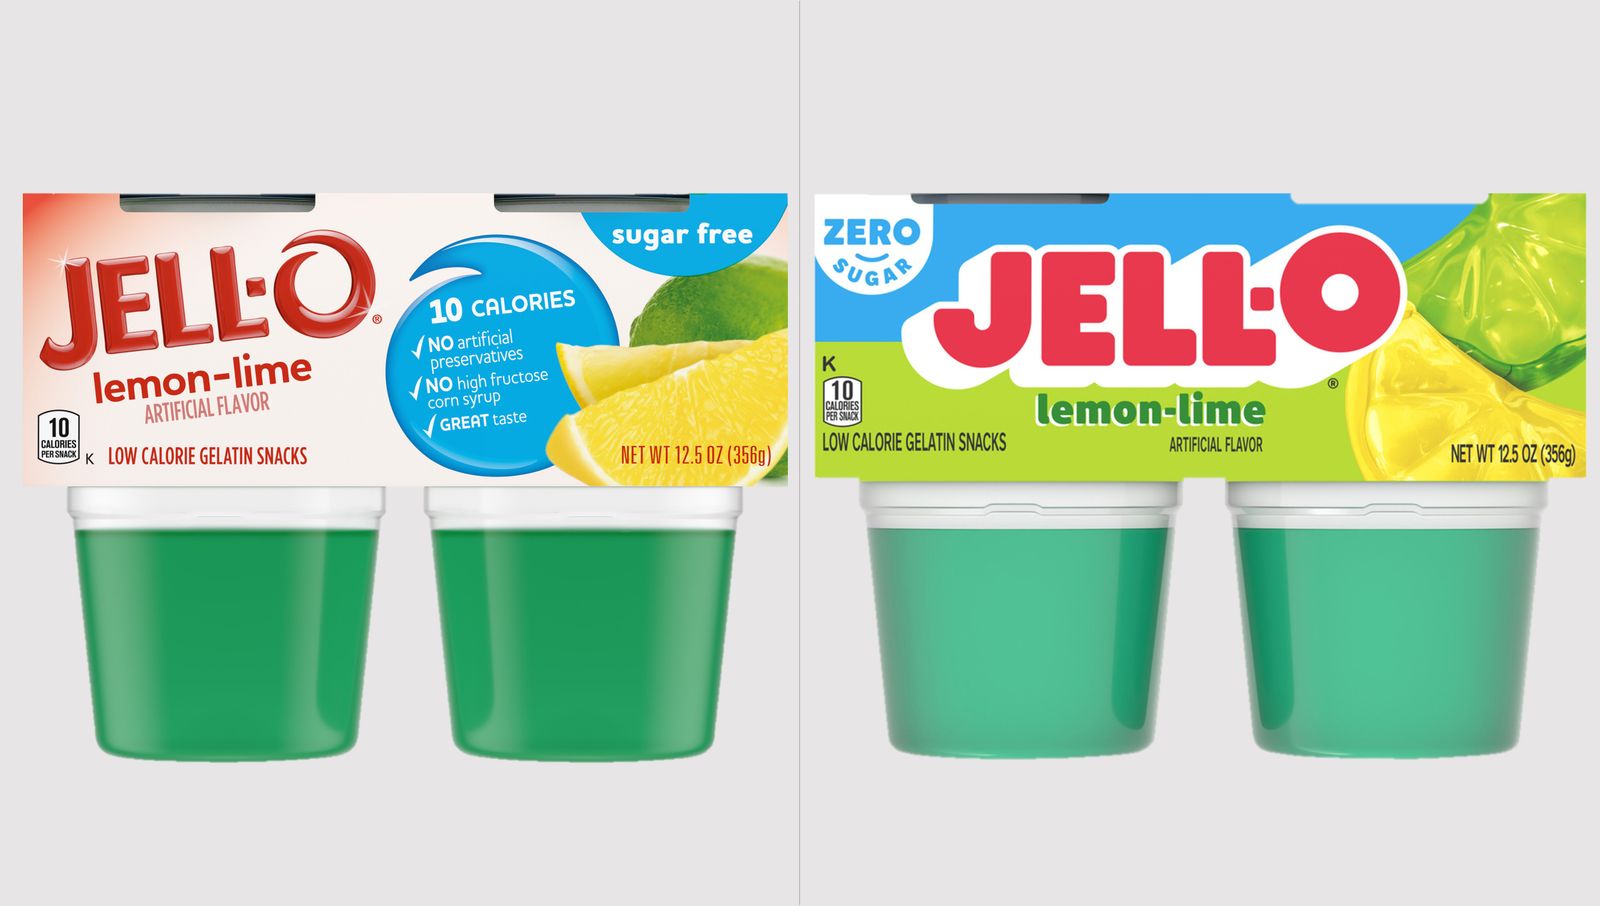 Jell-O, before and after the rebrand